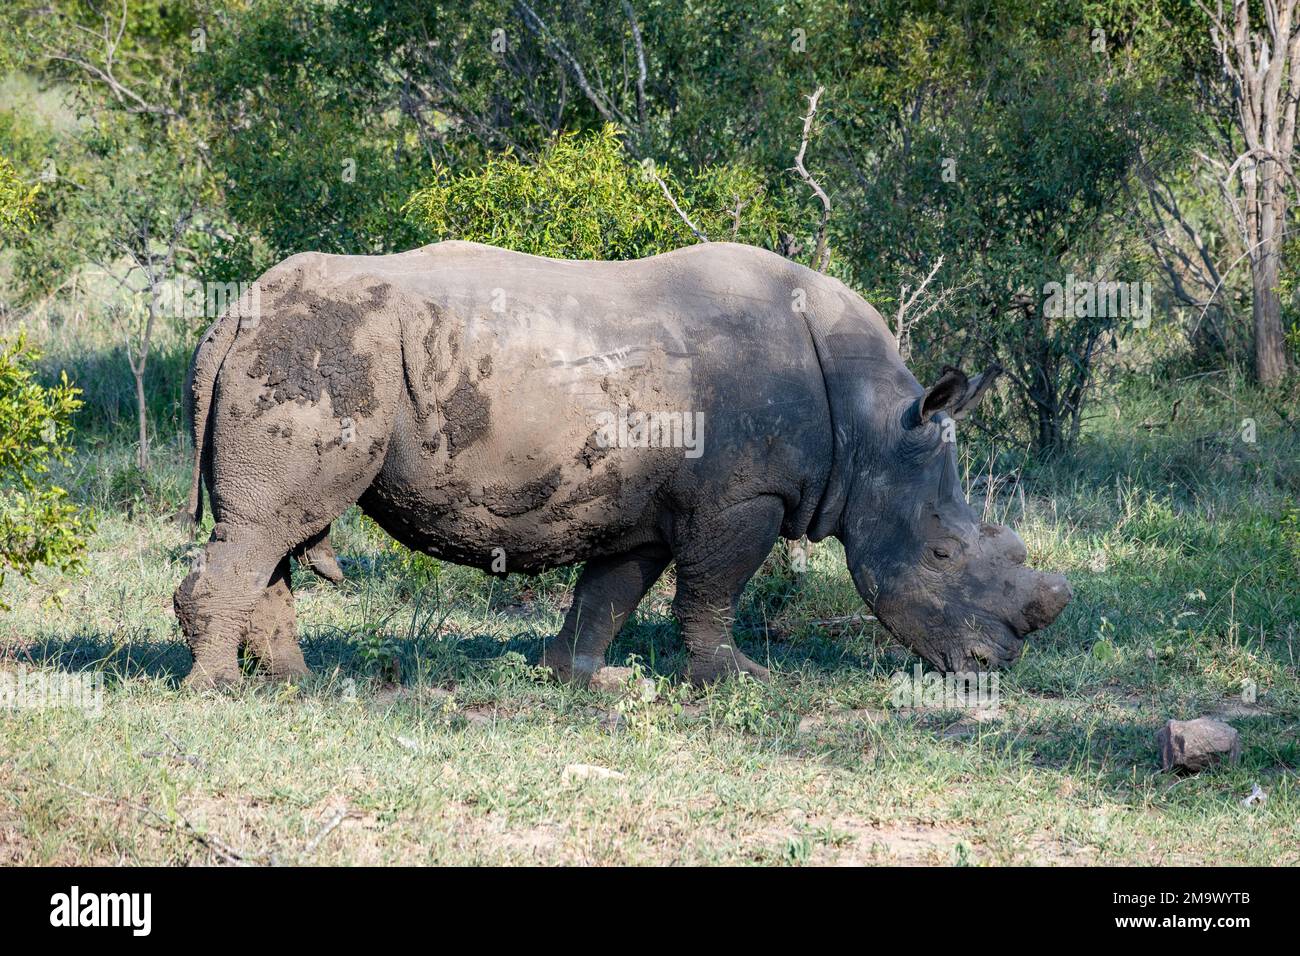 A White Rhinoceros (Ceratotherium simum) is dehorned to prevent pouching. Kruger National Park, South Africa. Stock Photo